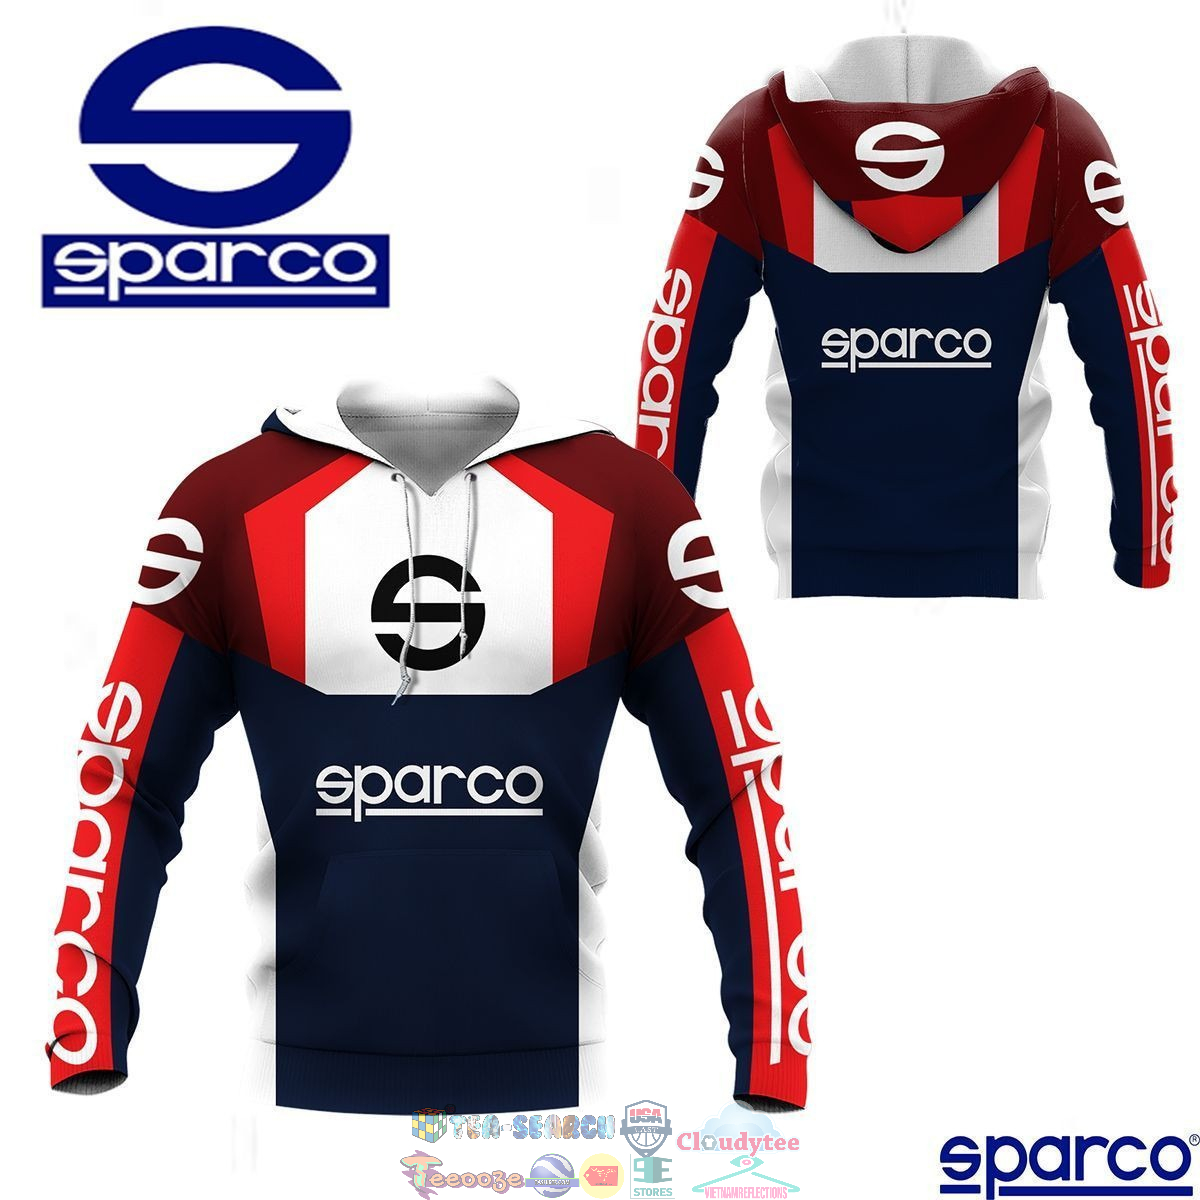 waQWg7Ly-TH080822-23xxxSparco-ver-28-3D-hoodie-and-t-shirt3.jpg